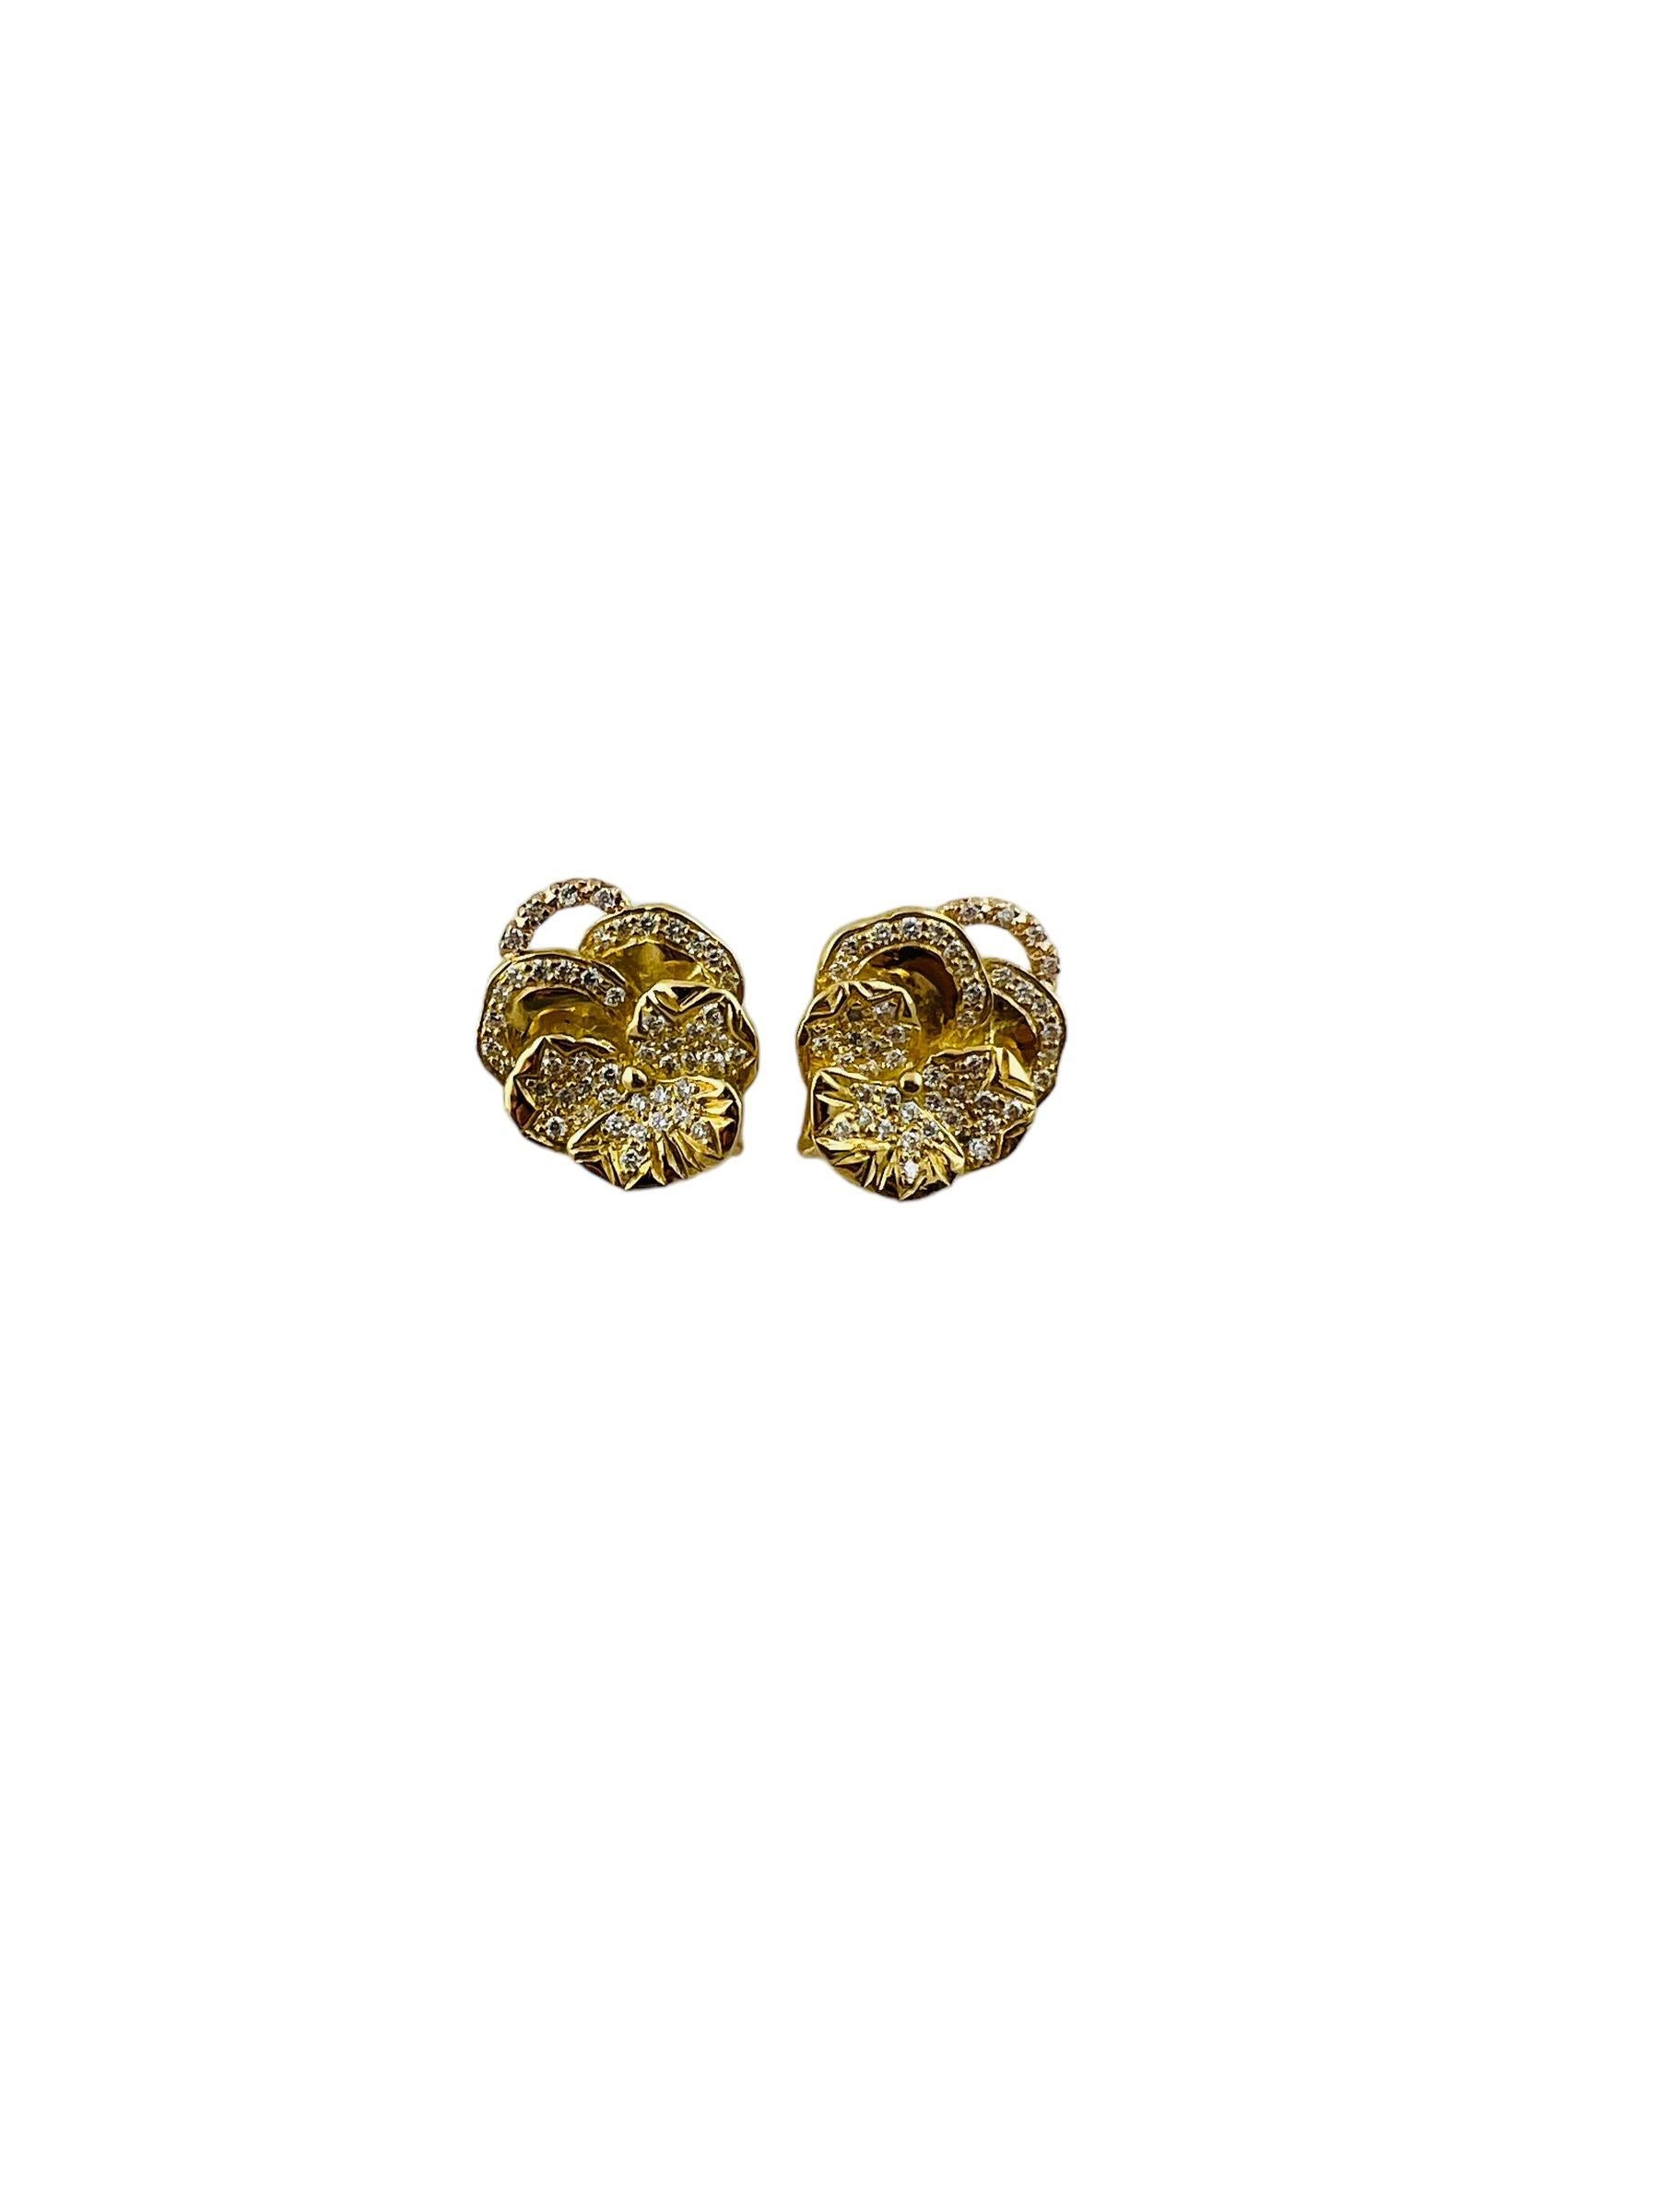 Mish NY 18K Yellow Gold Diamond Pansy Earring Enhancers

These beautiful pansy earring enhancers by Mish NY are from the floral collection. 

They are set with pave diamonds approx. .45 cts in total weight and of VS1 clarity, G color

Each enhancer